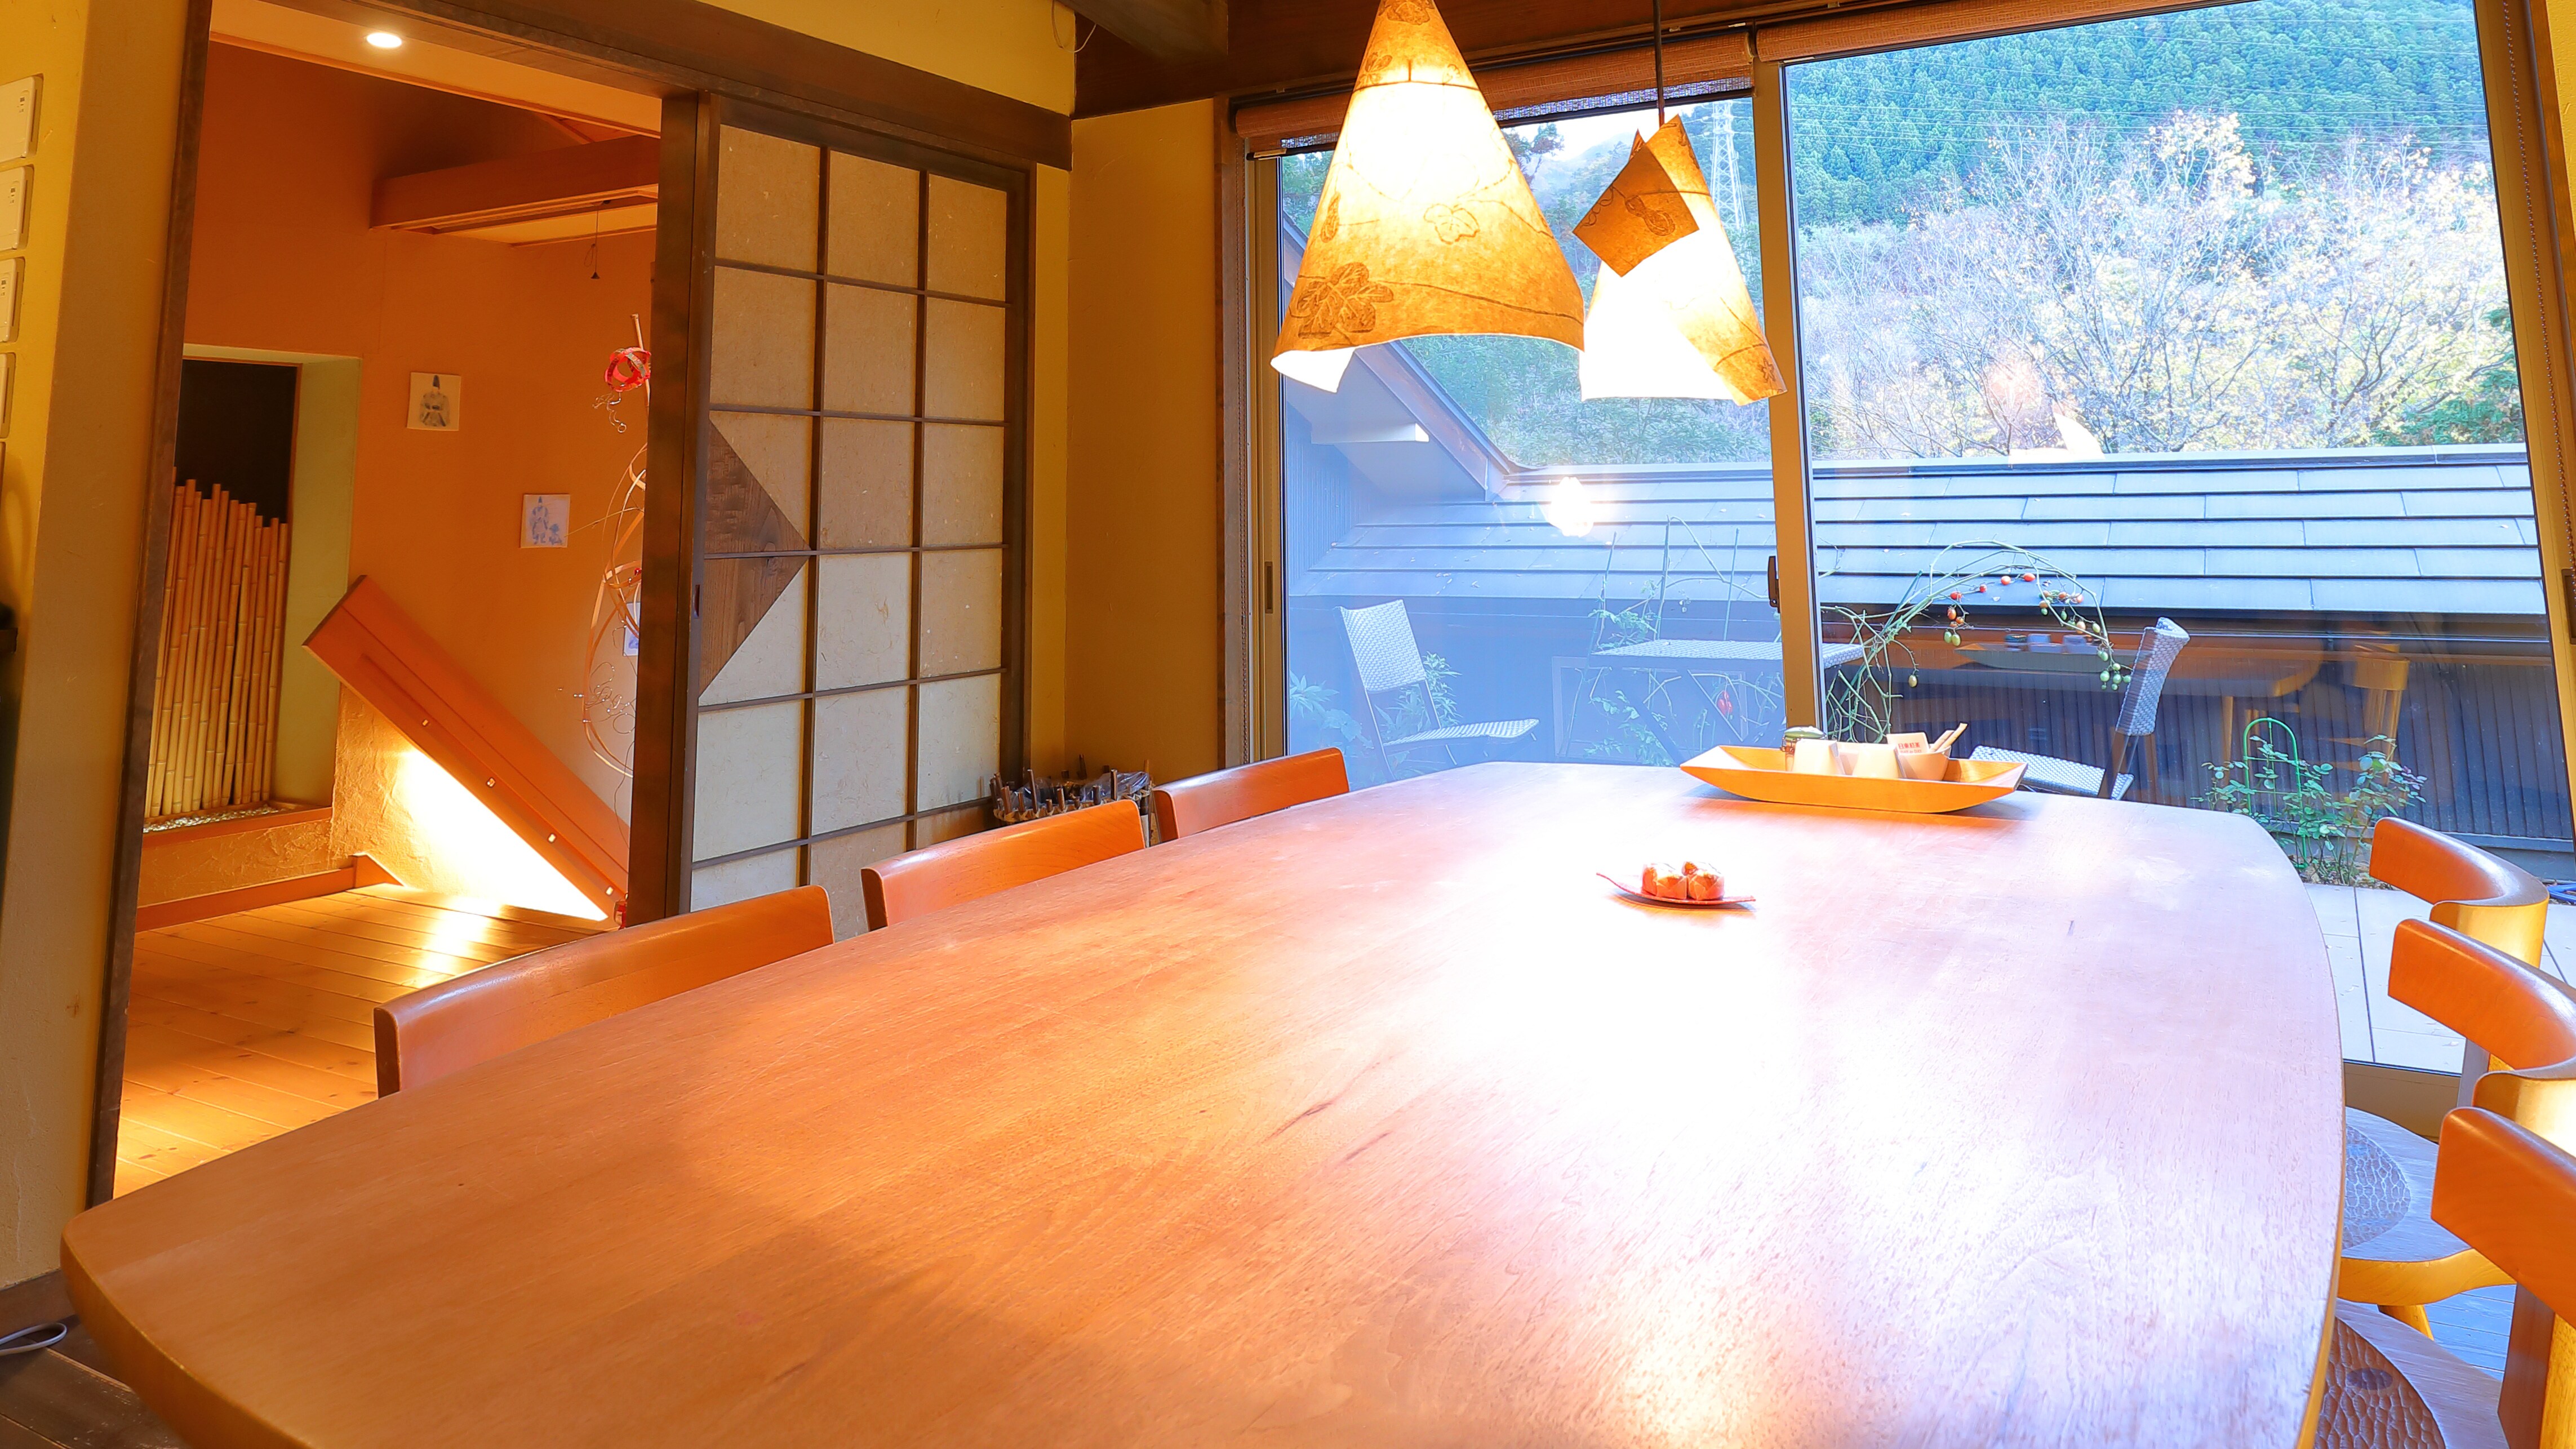 Special room [Hanare Kaguya] Dedicated restaurant. You can enjoy your meal without having to meet other people.